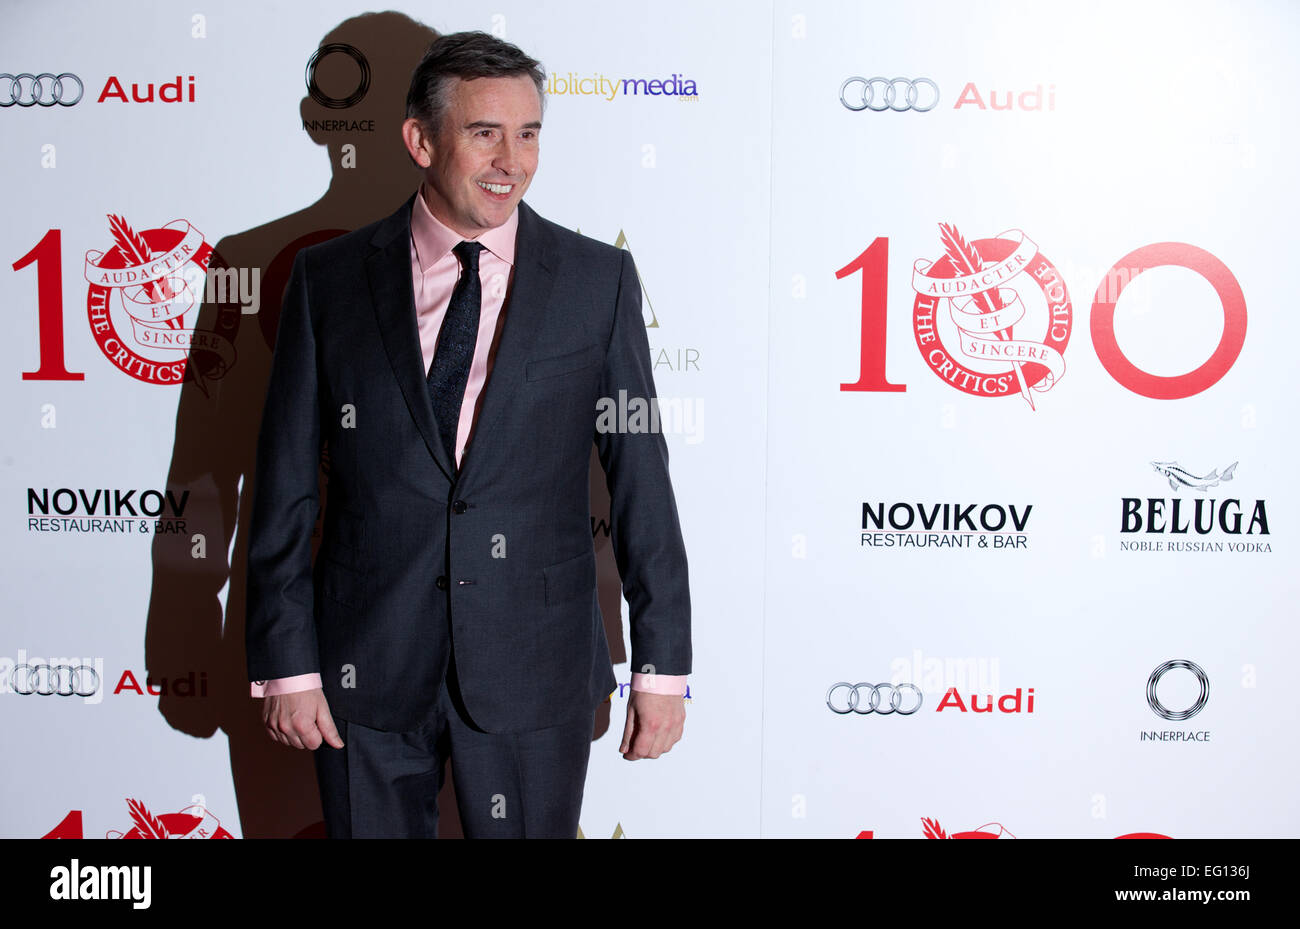 UNITED KINGDOM: British actor Steve Coogan poses for pictures on the red carpet as she arrives for the 34th London Critics Circle Film Awards in central London on February 2, 2014. Stock Photo